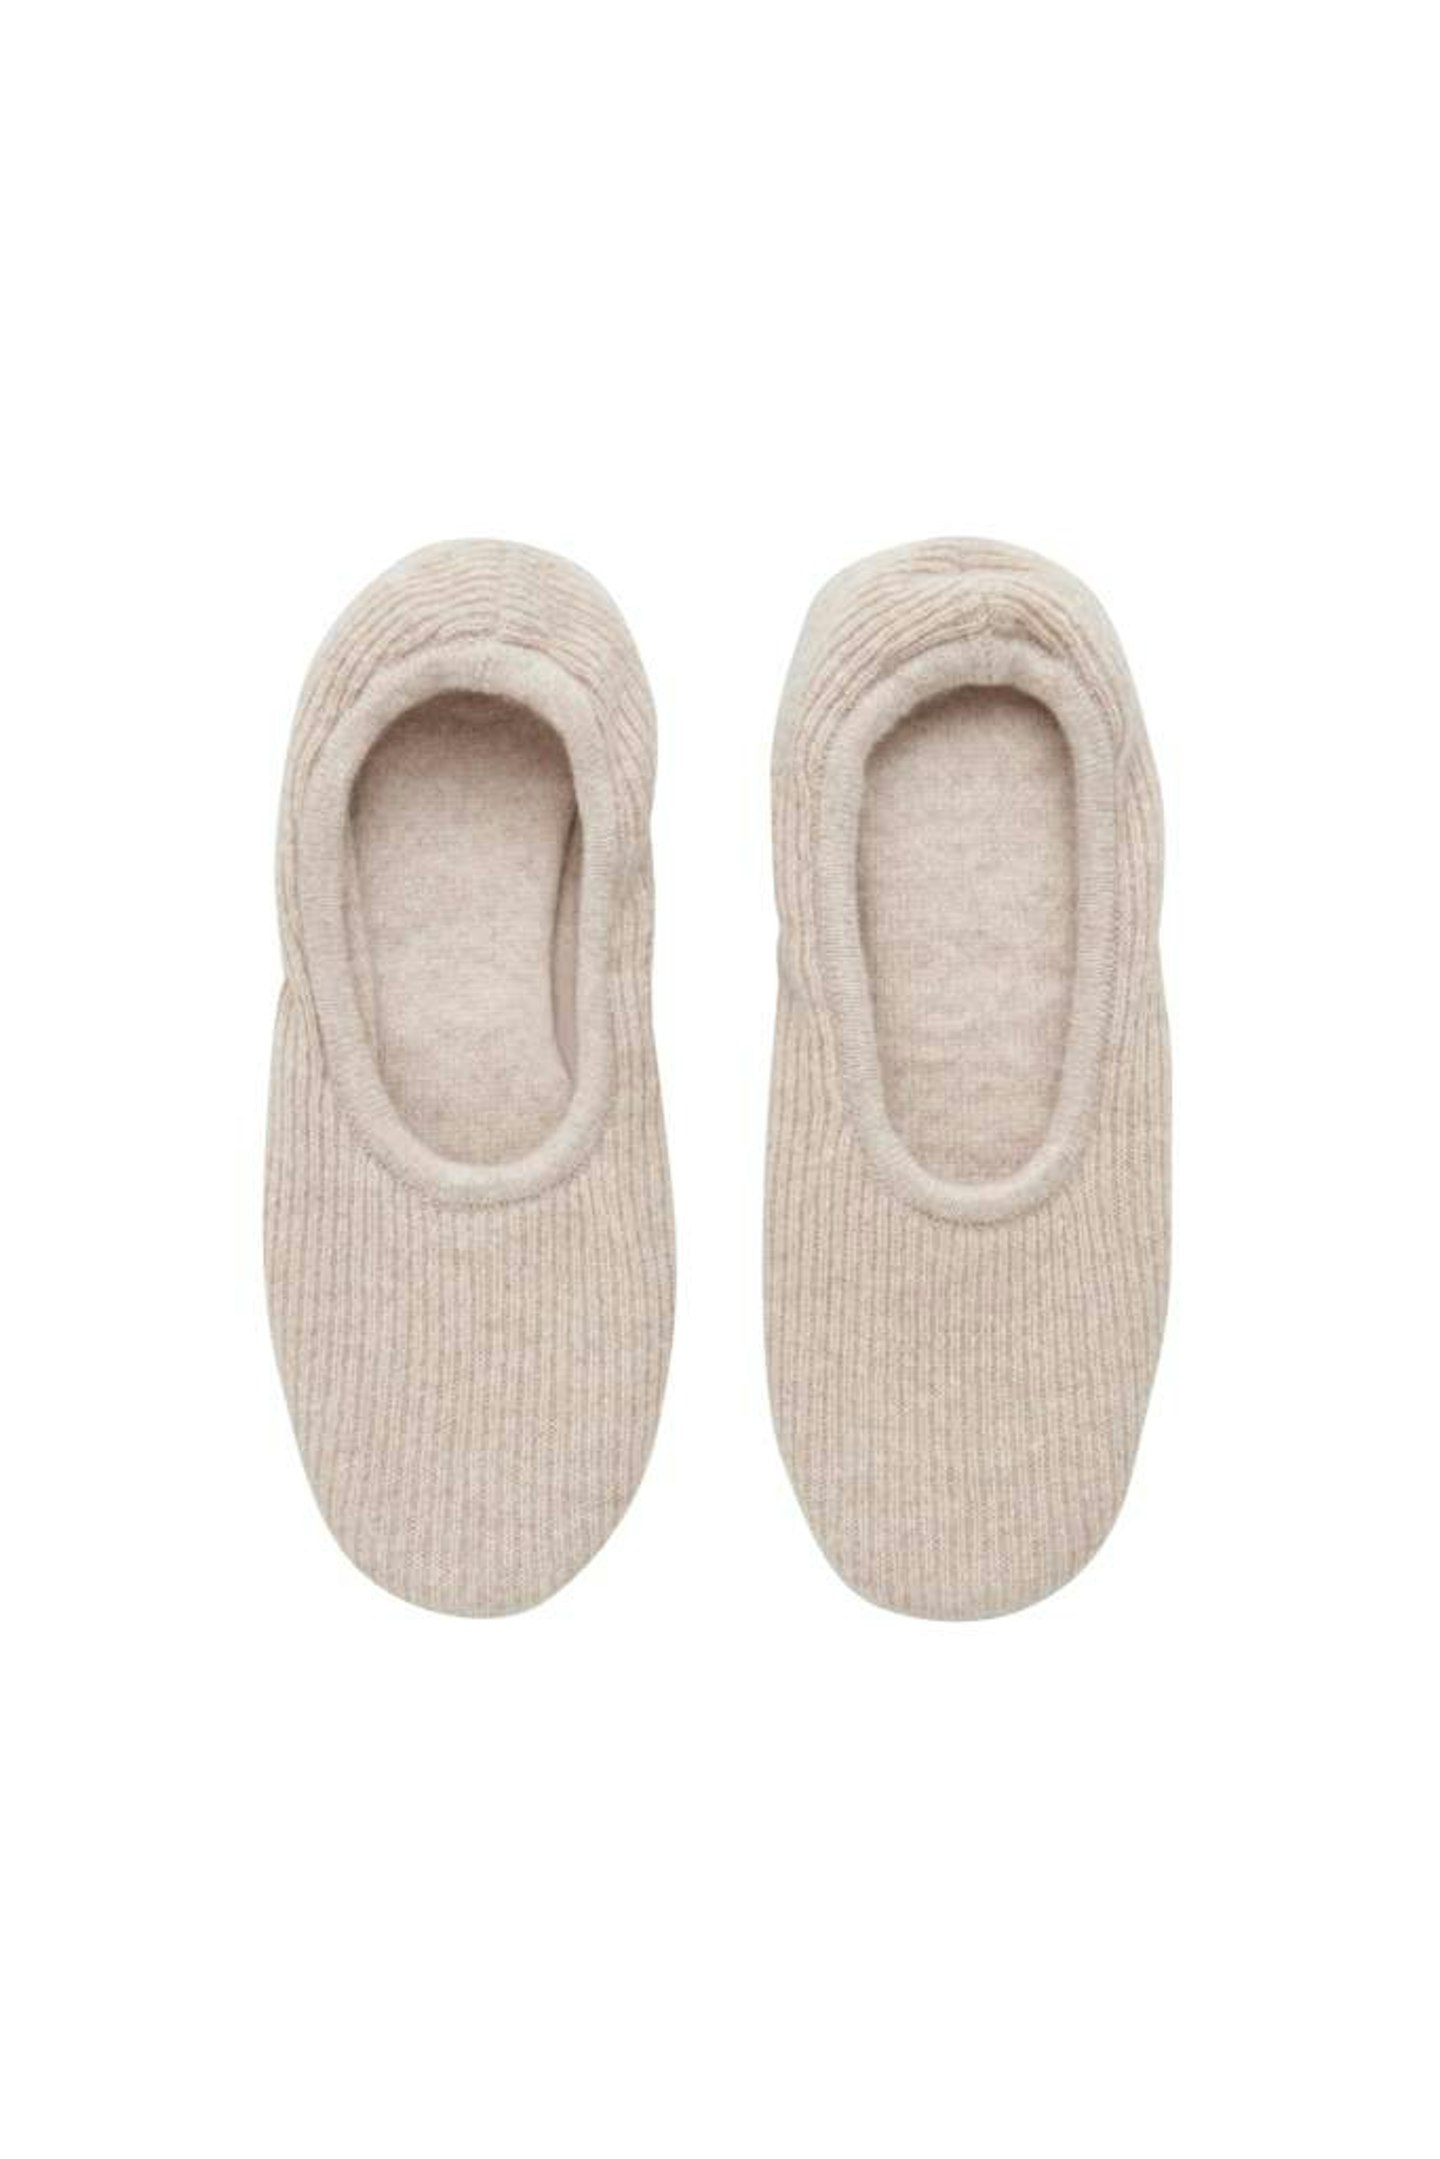 COS, Ribbed Cashmere Slippers, £55